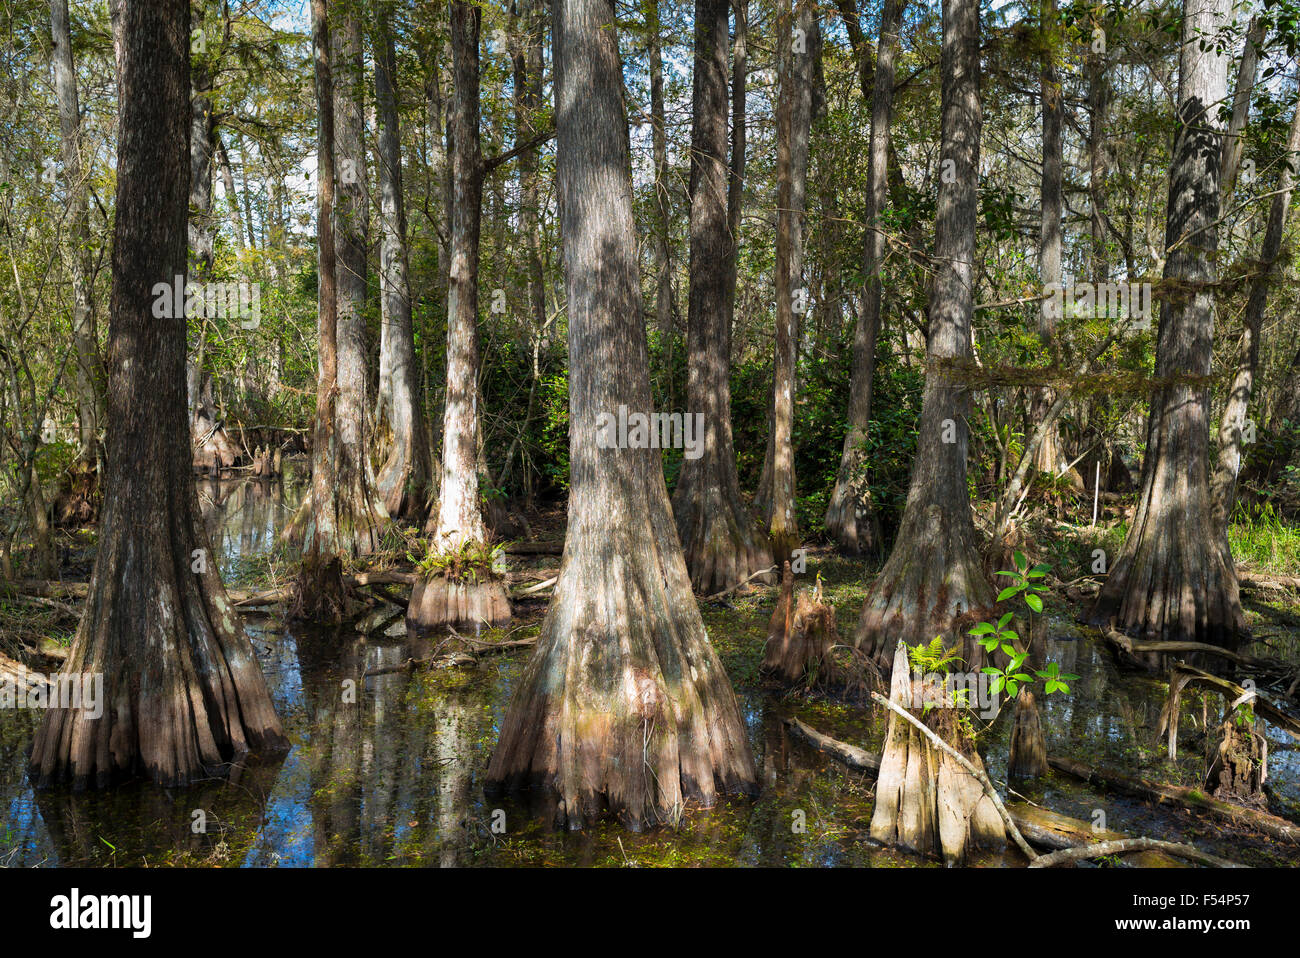 Forest of Bald cypress trees Taxodium distichum and reflections in swamp in the Florida Everglades, USA Stock Photo